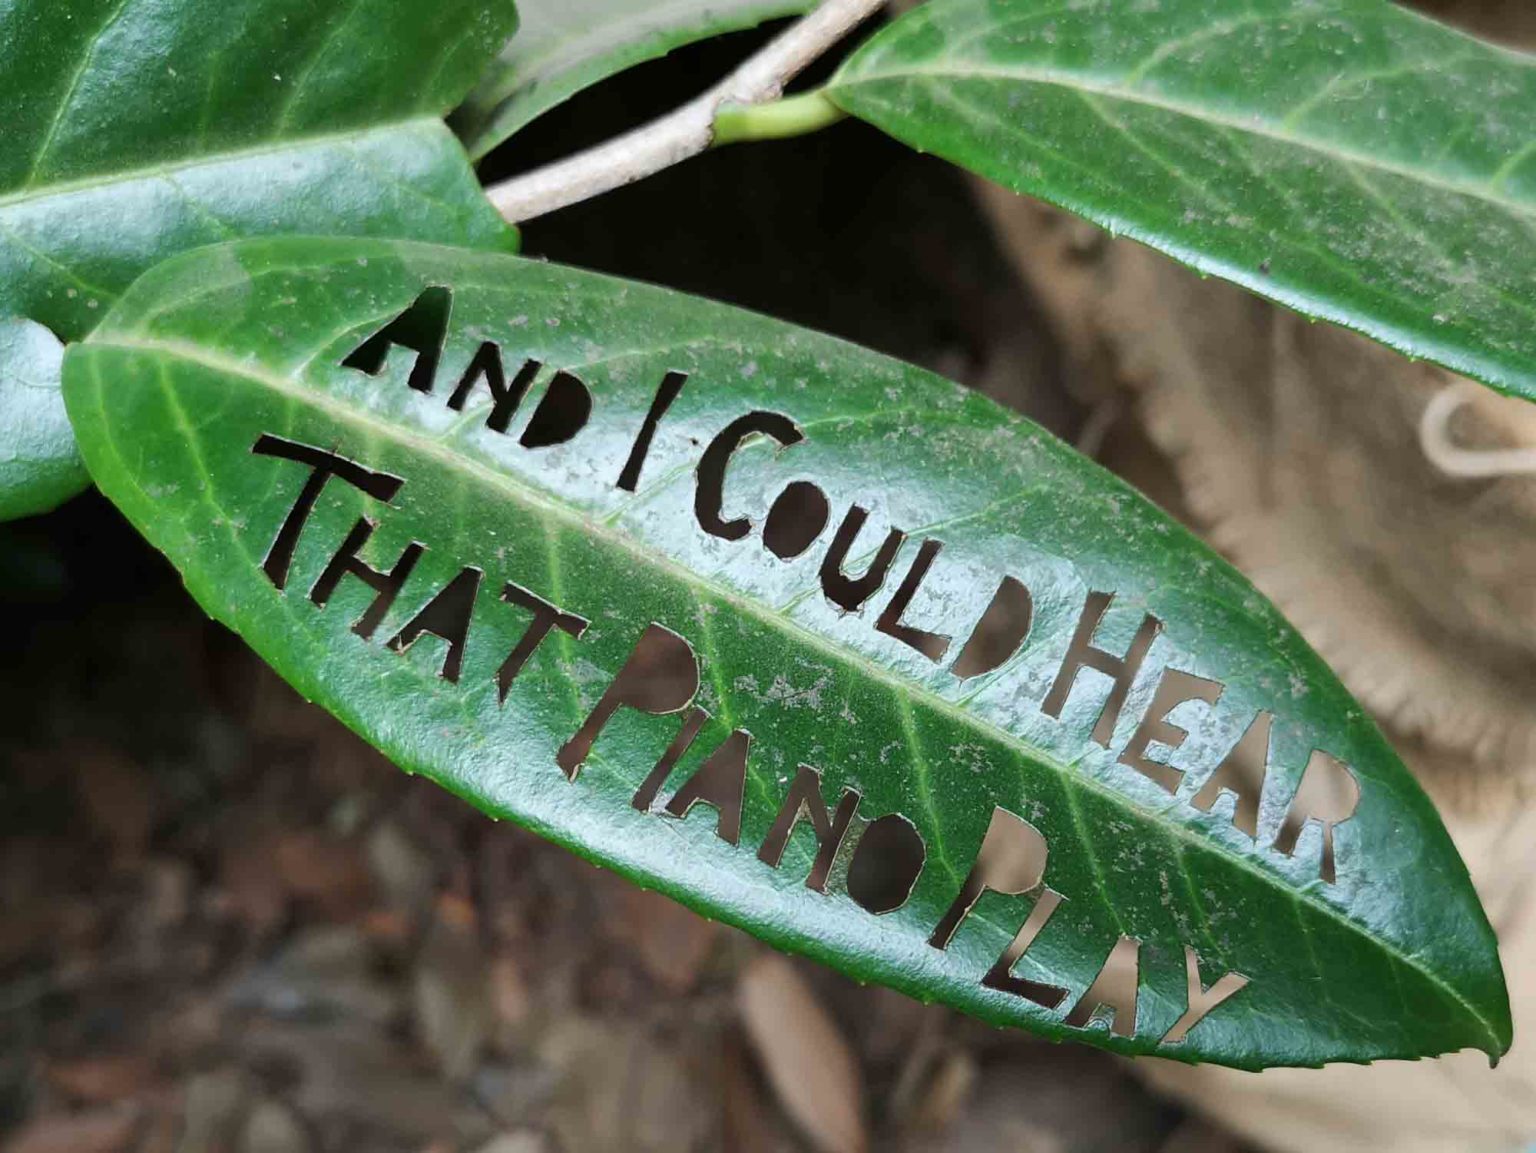 Messages cut into laurel leaves, in the woods.